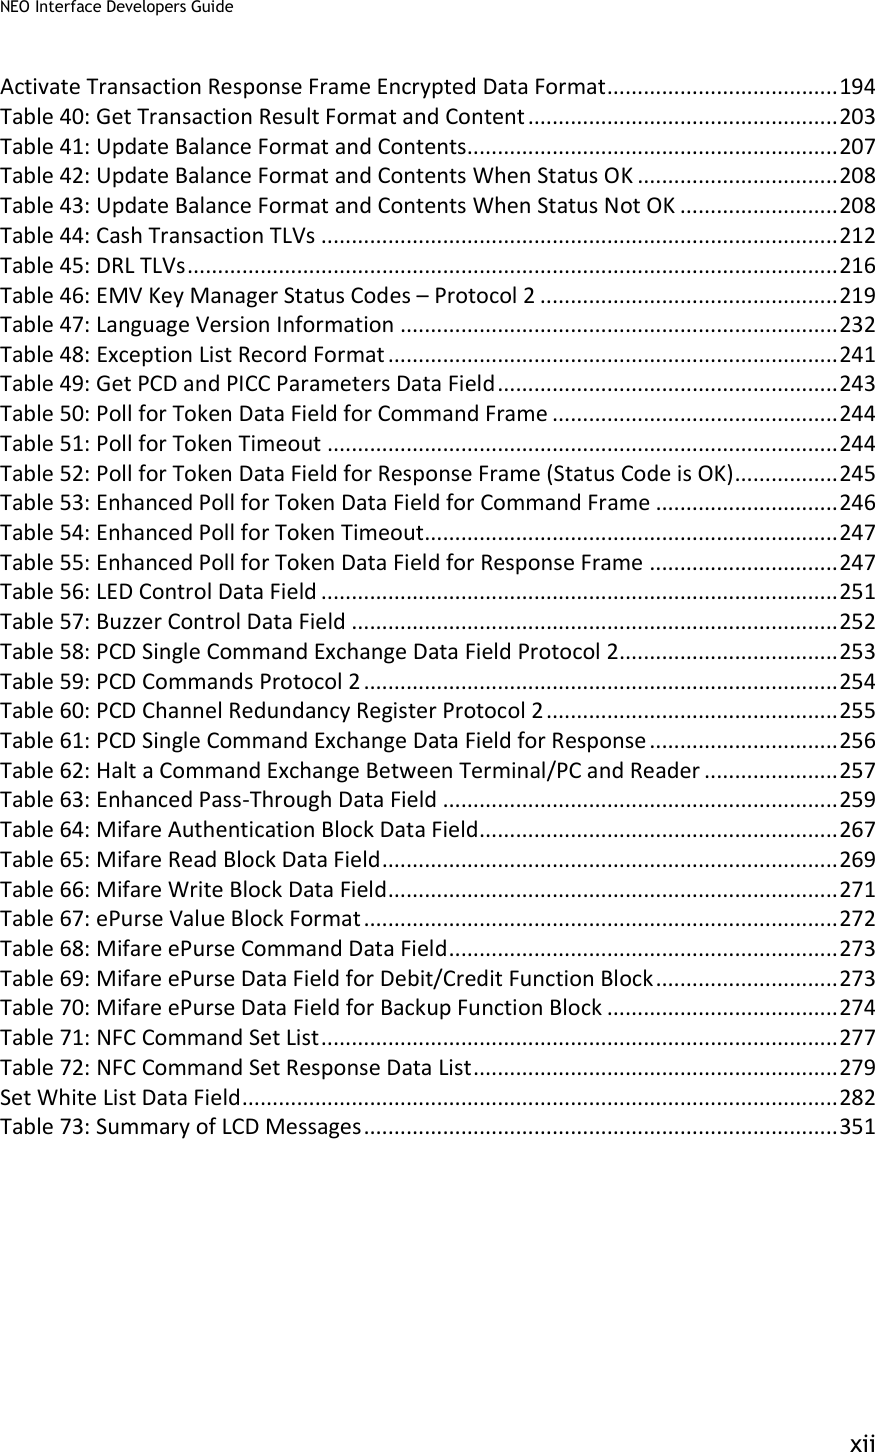 NEO Interface Developers Guide           xii Activate Transaction Response Frame Encrypted Data Format ...................................... 194 Table 40: Get Transaction Result Format and Content ................................................... 203 Table 41: Update Balance Format and Contents............................................................. 207 Table 42: Update Balance Format and Contents When Status OK ................................. 208 Table 43: Update Balance Format and Contents When Status Not OK .......................... 208 Table 44: Cash Transaction TLVs ..................................................................................... 212 Table 45: DRL TLVs ........................................................................................................... 216 Table 46: EMV Key Manager Status Codes – Protocol 2 ................................................. 219 Table 47: Language Version Information ........................................................................ 232 Table 48: Exception List Record Format .......................................................................... 241 Table 49: Get PCD and PICC Parameters Data Field ........................................................ 243 Table 50: Poll for Token Data Field for Command Frame ............................................... 244 Table 51: Poll for Token Timeout .................................................................................... 244 Table 52: Poll for Token Data Field for Response Frame (Status Code is OK) ................. 245 Table 53: Enhanced Poll for Token Data Field for Command Frame .............................. 246 Table 54: Enhanced Poll for Token Timeout .................................................................... 247 Table 55: Enhanced Poll for Token Data Field for Response Frame ............................... 247 Table 56: LED Control Data Field ..................................................................................... 251 Table 57: Buzzer Control Data Field ................................................................................ 252 Table 58: PCD Single Command Exchange Data Field Protocol 2.................................... 253 Table 59: PCD Commands Protocol 2 .............................................................................. 254 Table 60: PCD Channel Redundancy Register Protocol 2 ................................................ 255 Table 61: PCD Single Command Exchange Data Field for Response ............................... 256 Table 62: Halt a Command Exchange Between Terminal/PC and Reader ...................... 257 Table 63: Enhanced Pass-Through Data Field ................................................................. 259 Table 64: Mifare Authentication Block Data Field........................................................... 267 Table 65: Mifare Read Block Data Field ........................................................................... 269 Table 66: Mifare Write Block Data Field .......................................................................... 271 Table 67: ePurse Value Block Format .............................................................................. 272 Table 68: Mifare ePurse Command Data Field ................................................................ 273 Table 69: Mifare ePurse Data Field for Debit/Credit Function Block .............................. 273 Table 70: Mifare ePurse Data Field for Backup Function Block ...................................... 274 Table 71: NFC Command Set List ..................................................................................... 277 Table 72: NFC Command Set Response Data List ............................................................ 279 Set White List Data Field .................................................................................................. 282 Table 73: Summary of LCD Messages .............................................................................. 351  